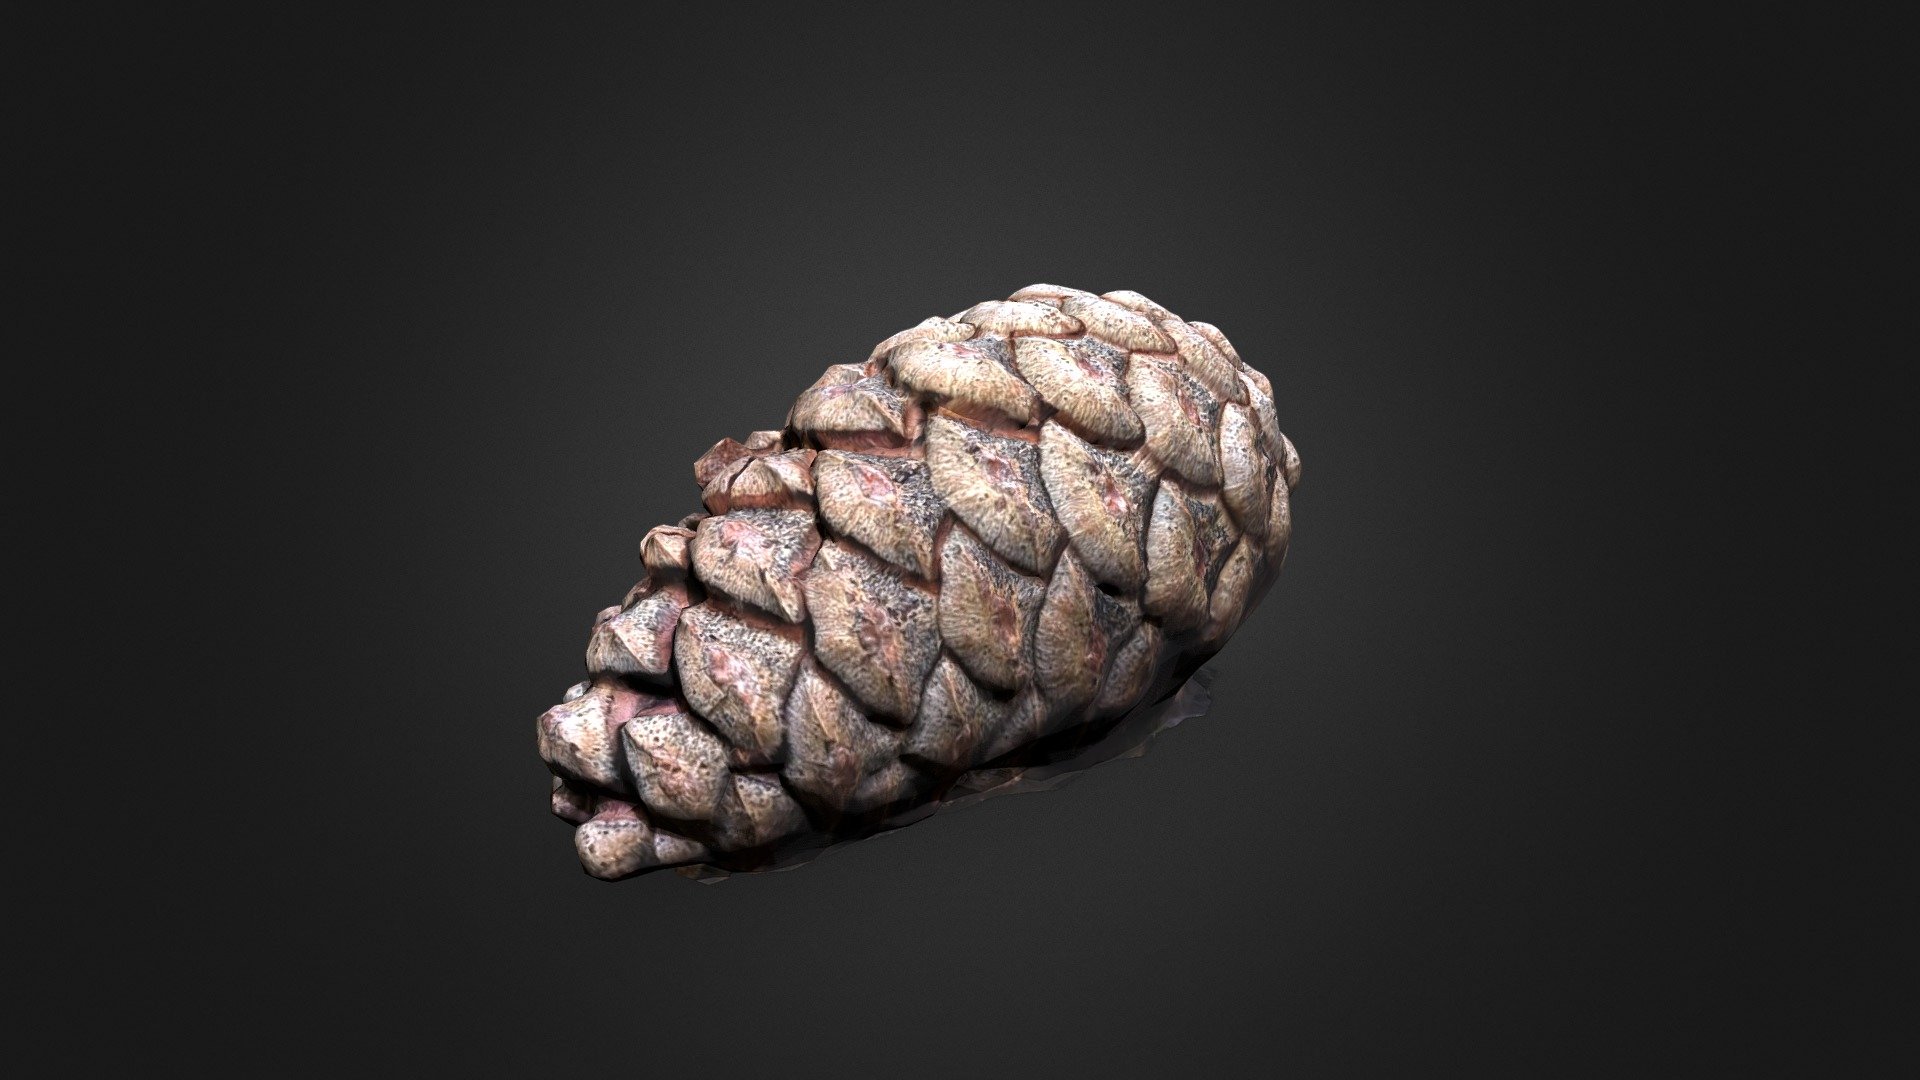 Pine Cone scanned using Polycam at Sherwood Forest, Nottingham.



UAVisionary is a specialist Drone Photography and Videography Company based in the UK Visit ou website to find out more UAVisionary Ltd (www.uavisionary.co.uk)

Thanks for taking a look at our photogrammetry models.

Right, where's my phone - time to scan some more stuff for the metaverse 3d model